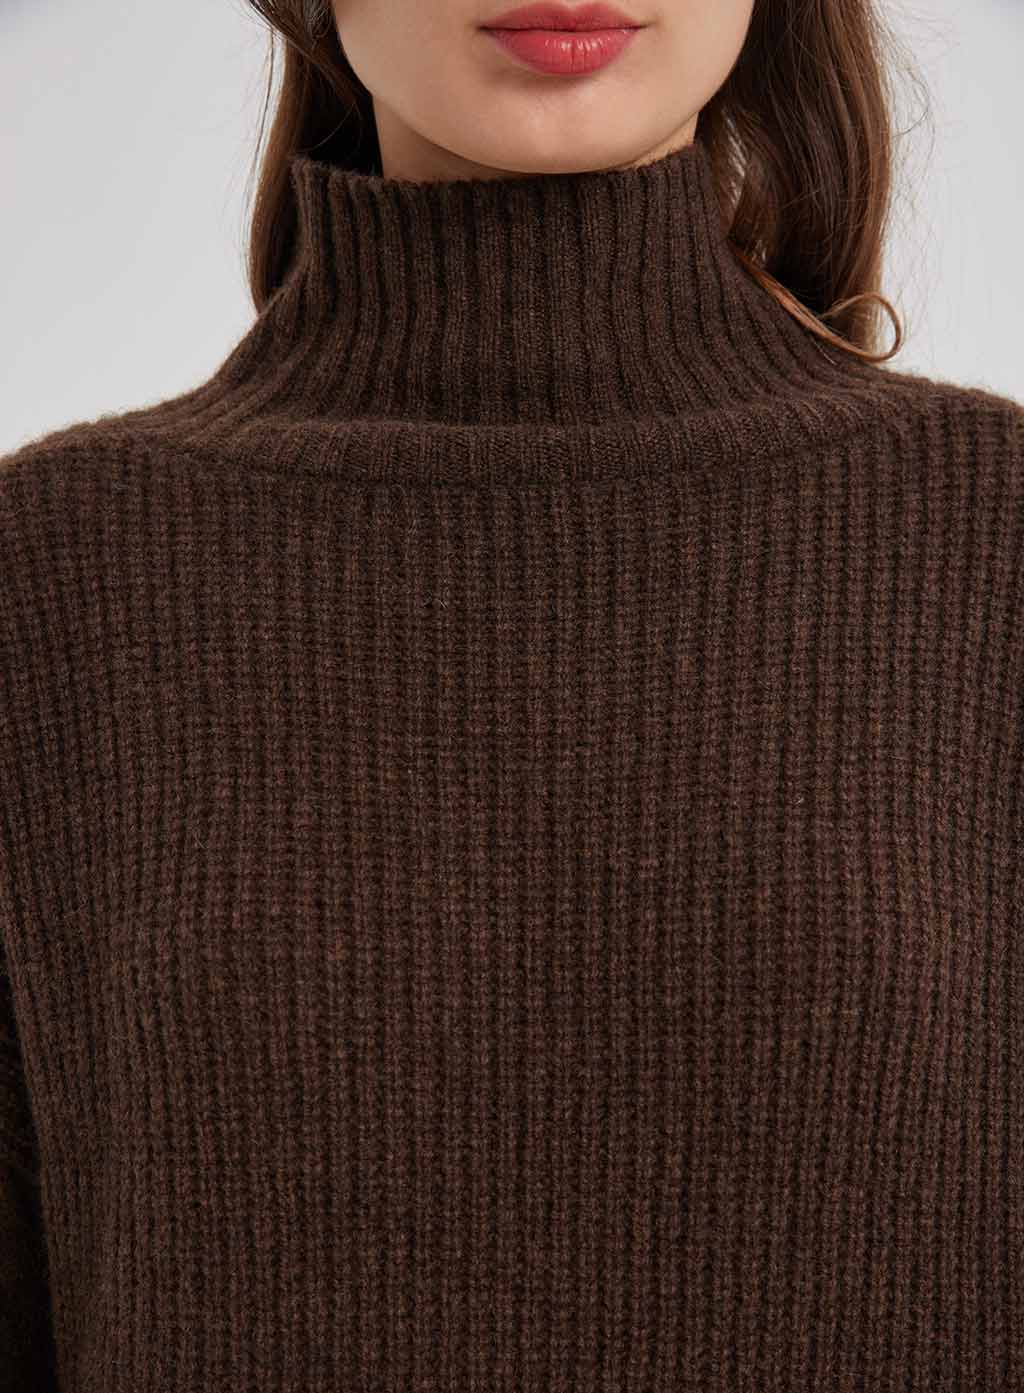 Cable Knit Sleeve Yak Sweater, Women Jumper Tops